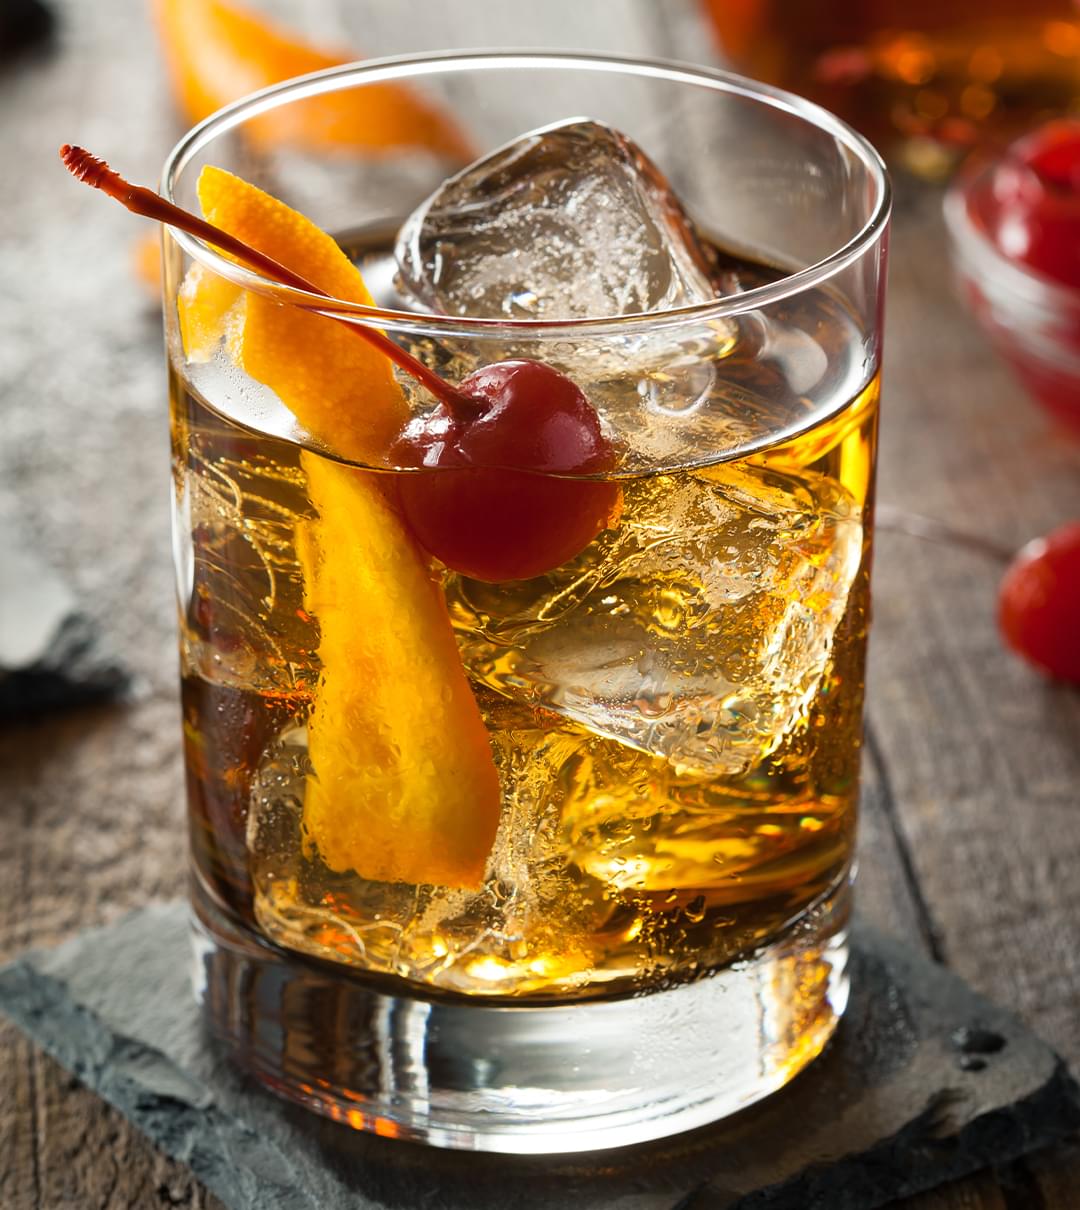 Limited Edition Old Fashioned